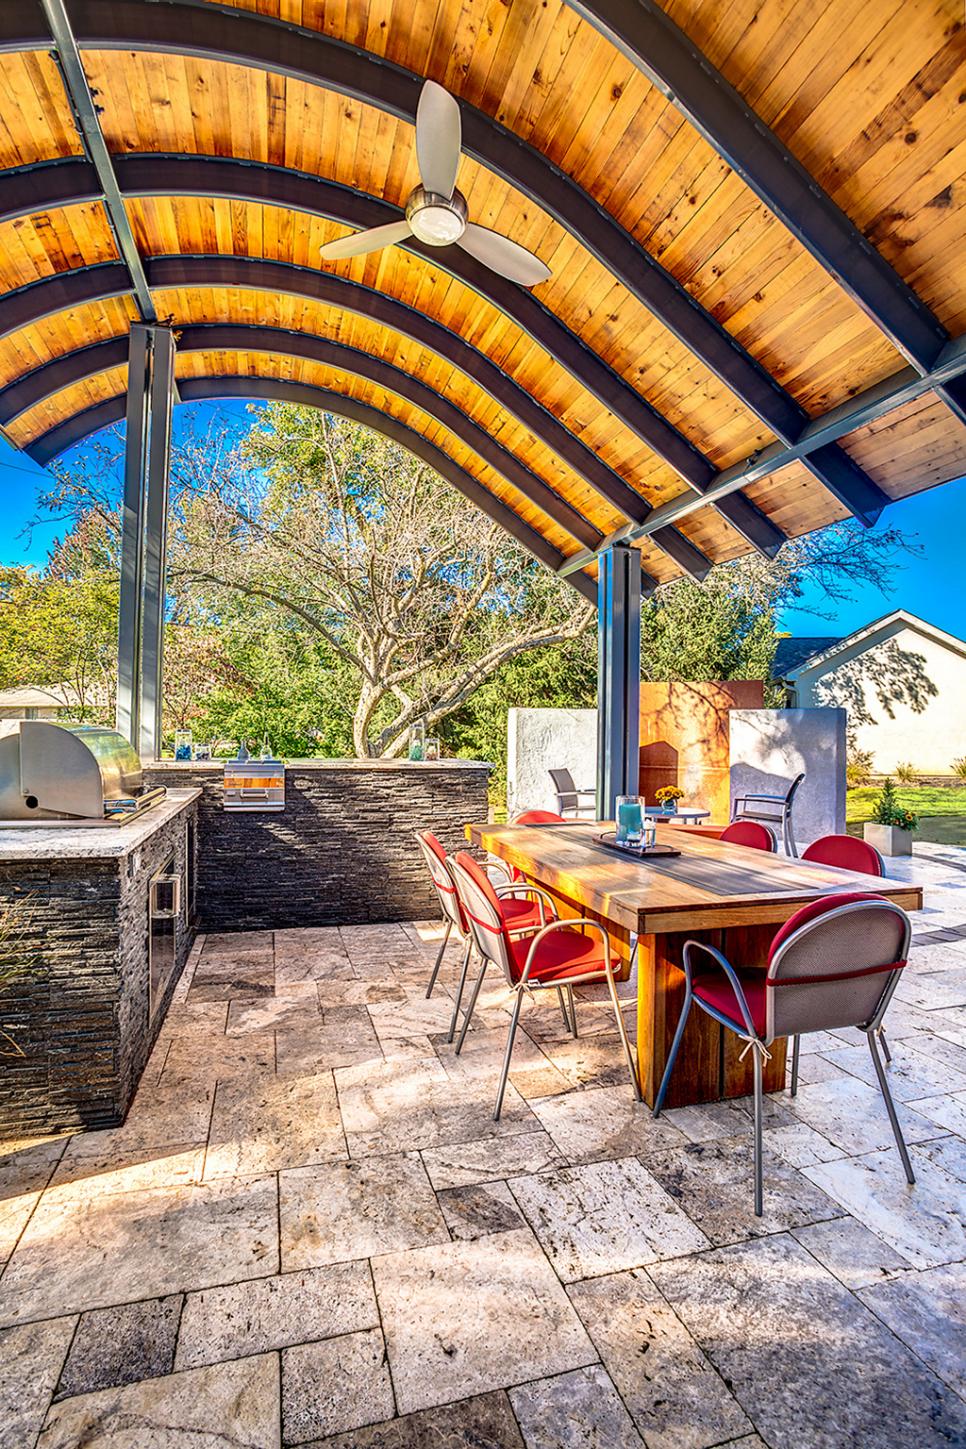 Patio With Modern Steel Roof and Outdoor Fireplace | HGTV ...
